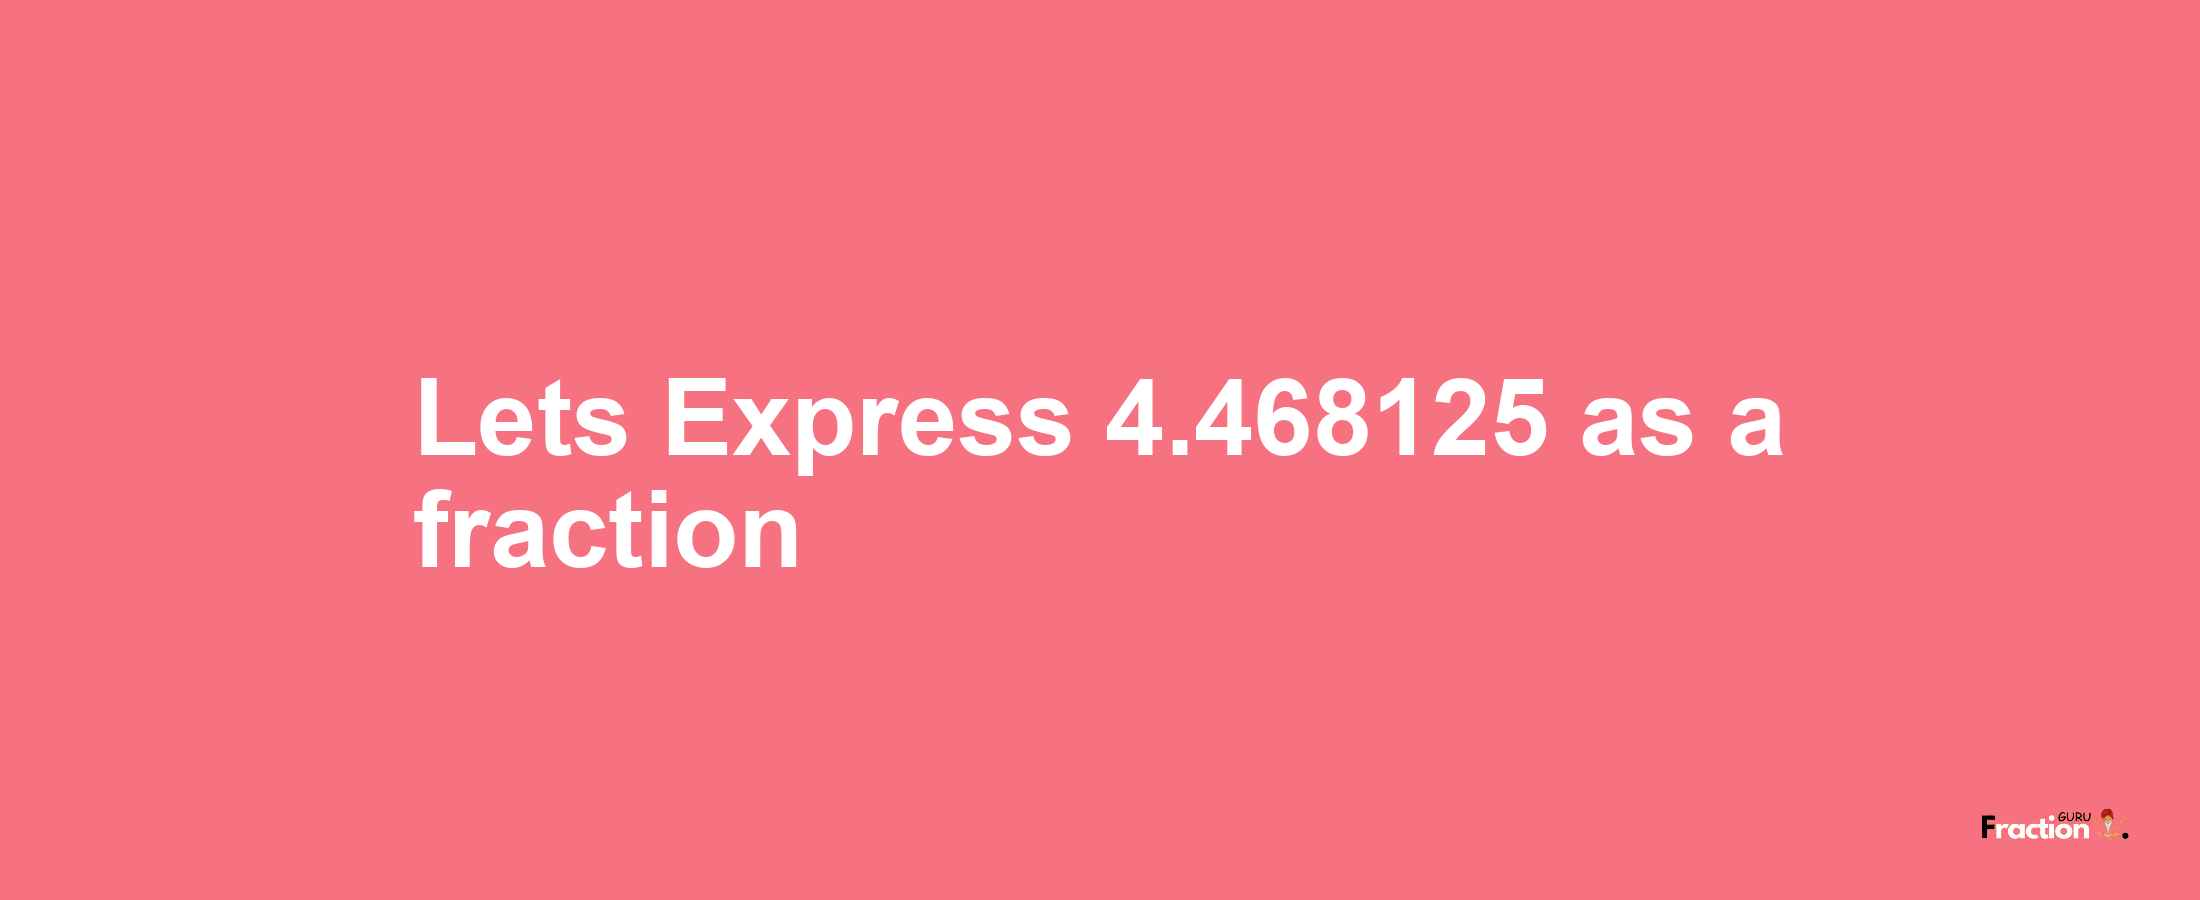 Lets Express 4.468125 as afraction